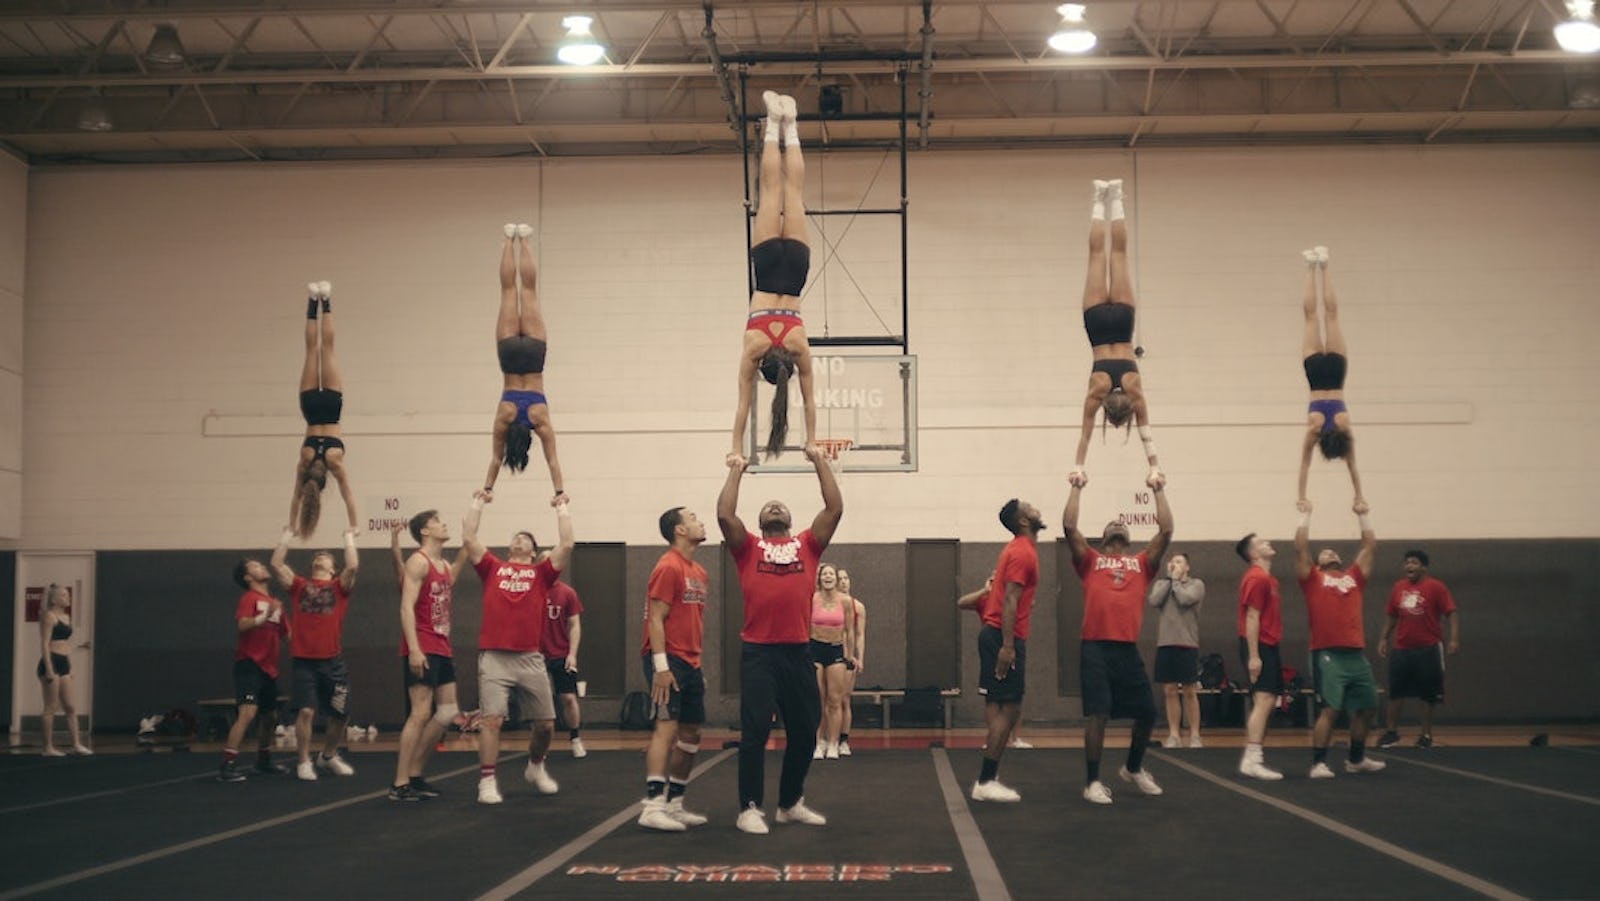 These Navarro Cheer Videos From Daytona Are Almost A Whole New ‘Cheer’ Ep